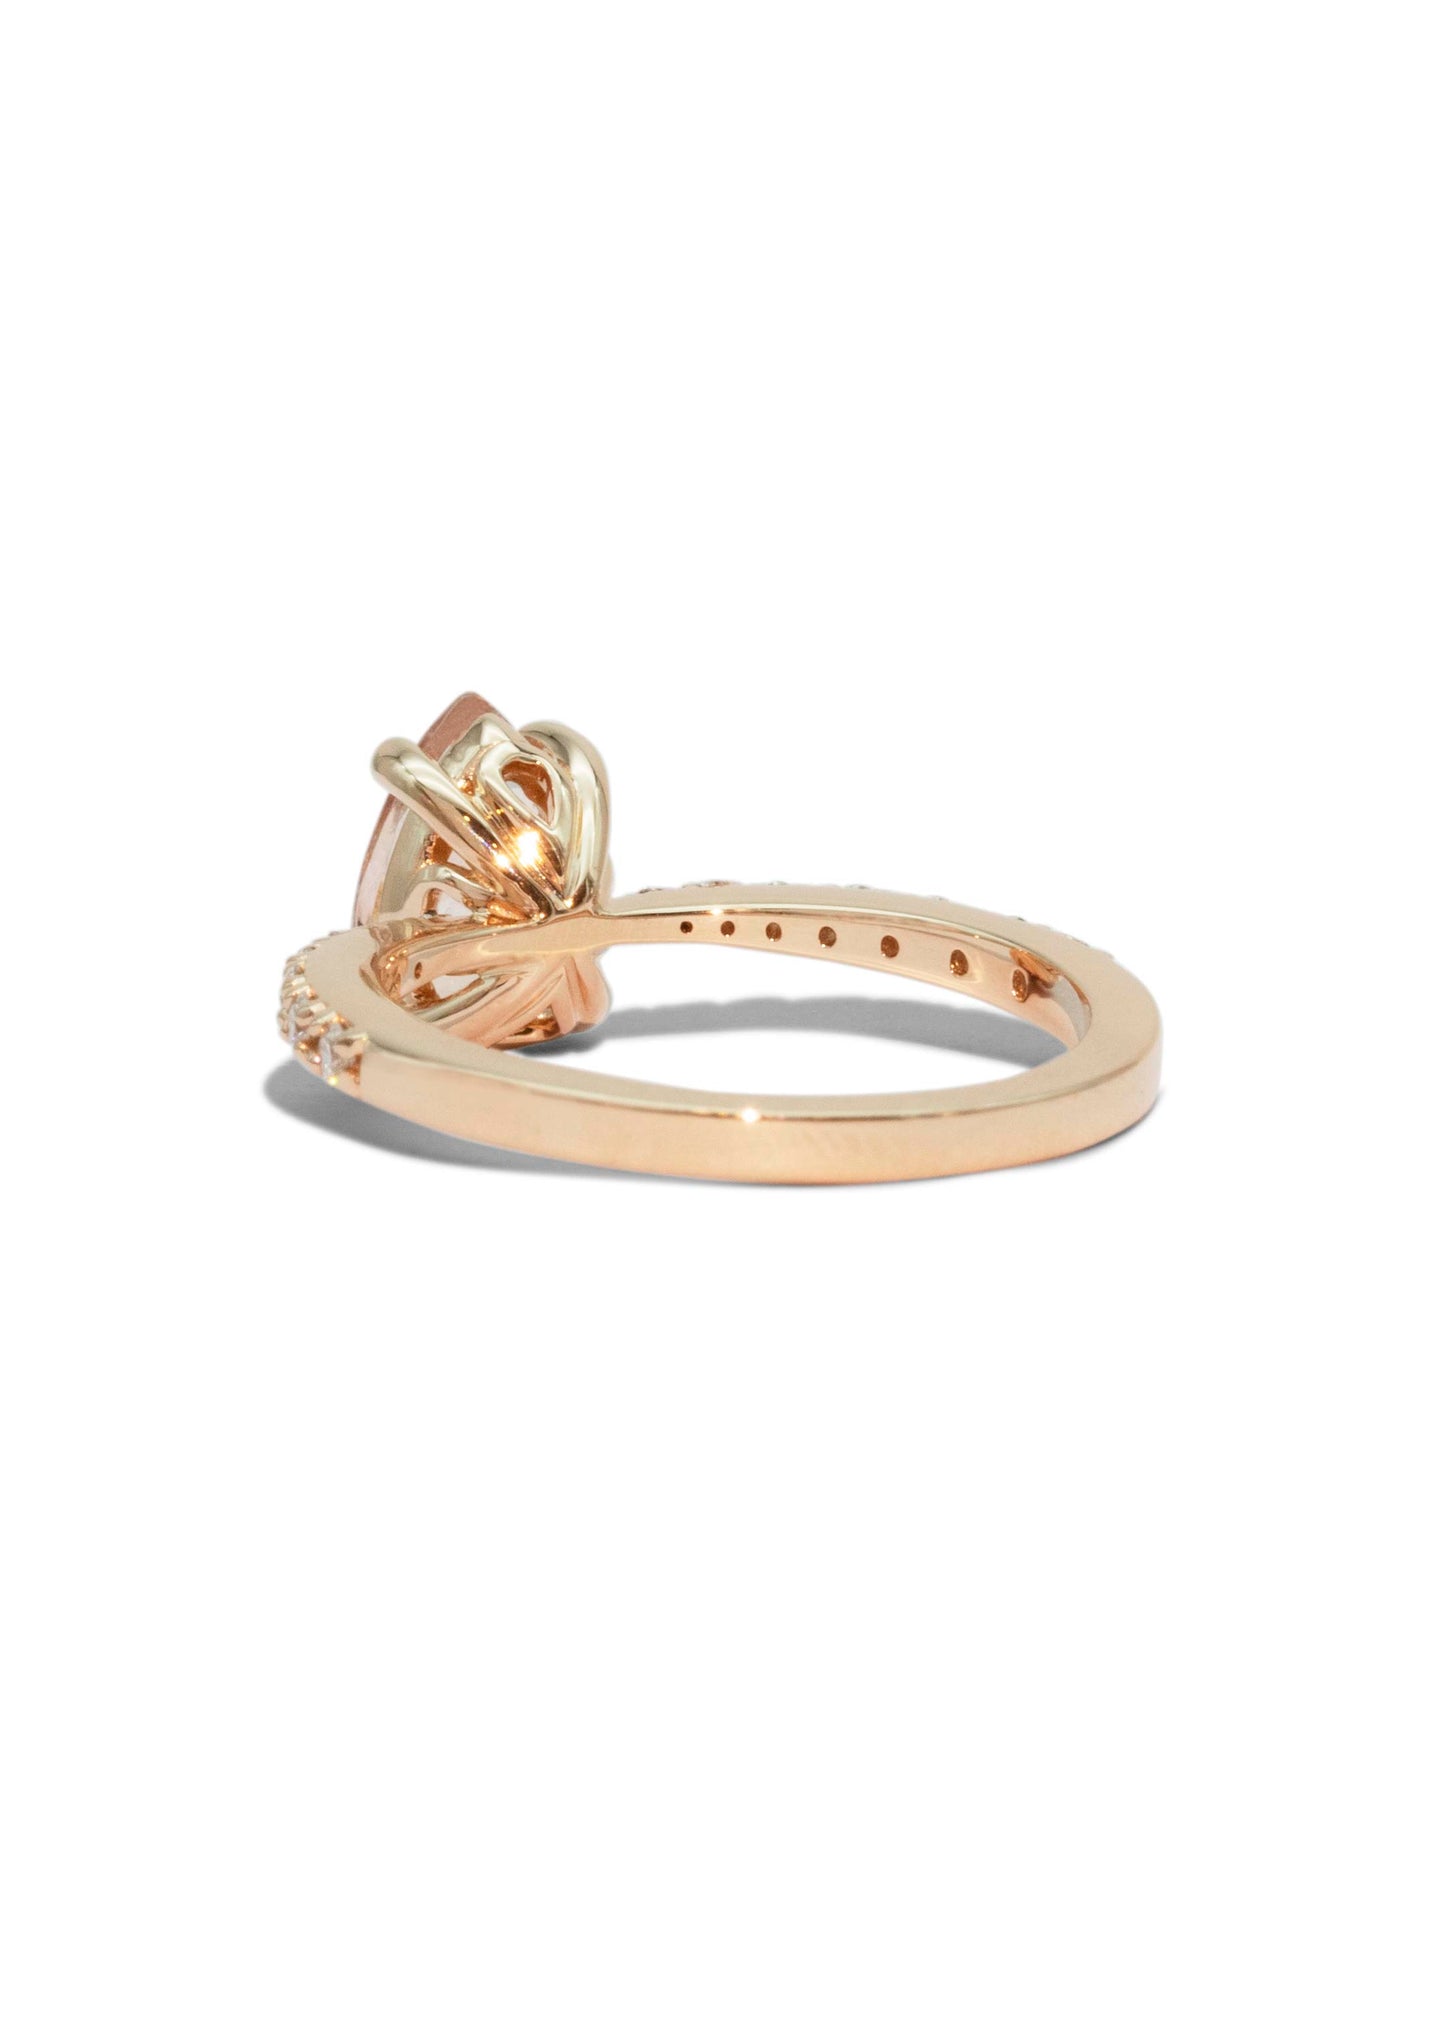 The Celine Ring with 1.16ct Peach Morganite